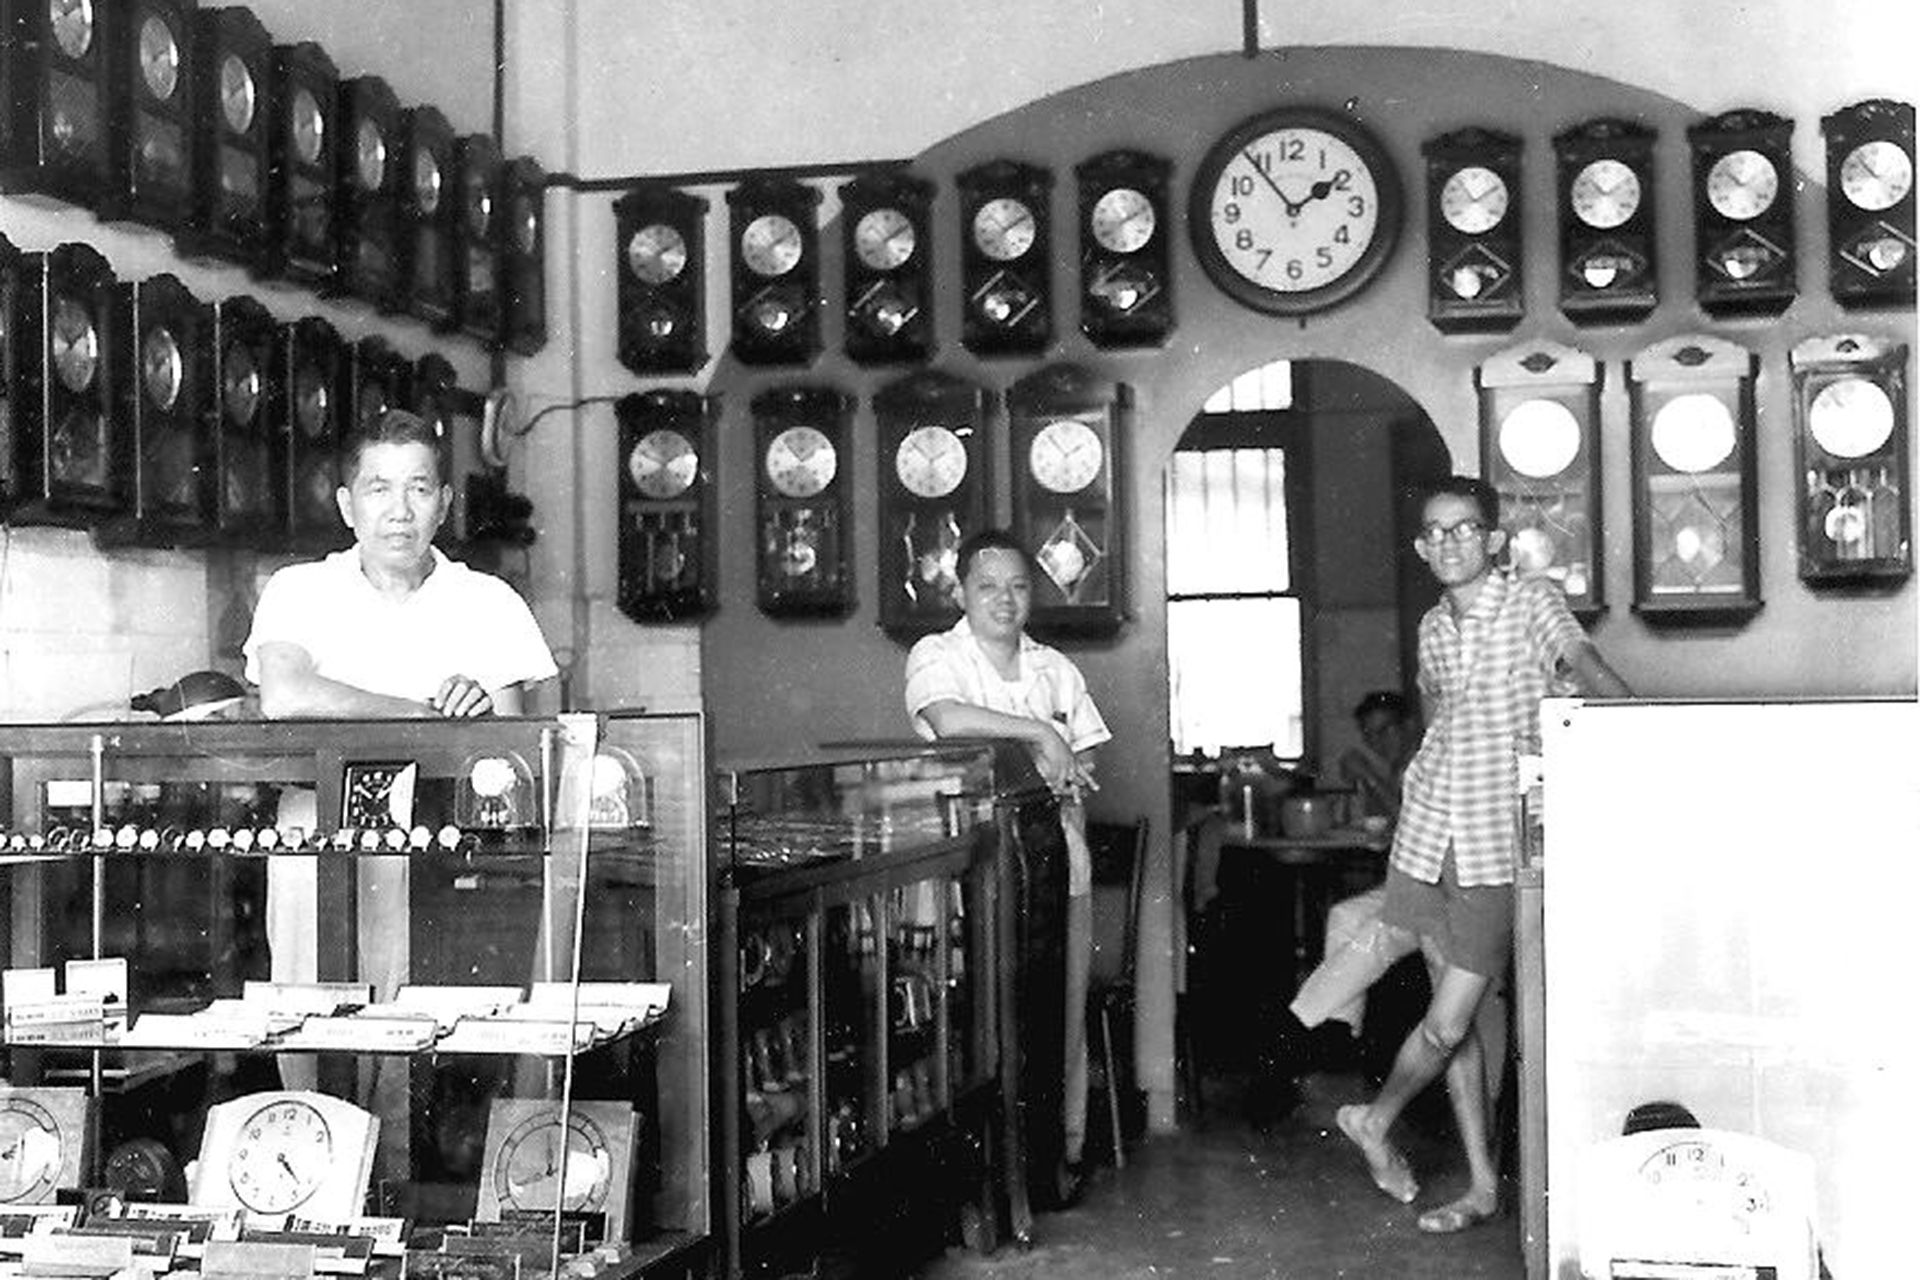 (From left)  Mr Mun Sah (Mr Mun Chor Weng’s father), Mr Kan Hong Keen (father’s assistant), and Mr Mun Chor Koon (eldest brother), in the clock shop. Mr Mun Chor Weng is partially blocked at the back, having lunch after school in the 1950s. PHOTO: COURTESY OF MUN CHOR SENG